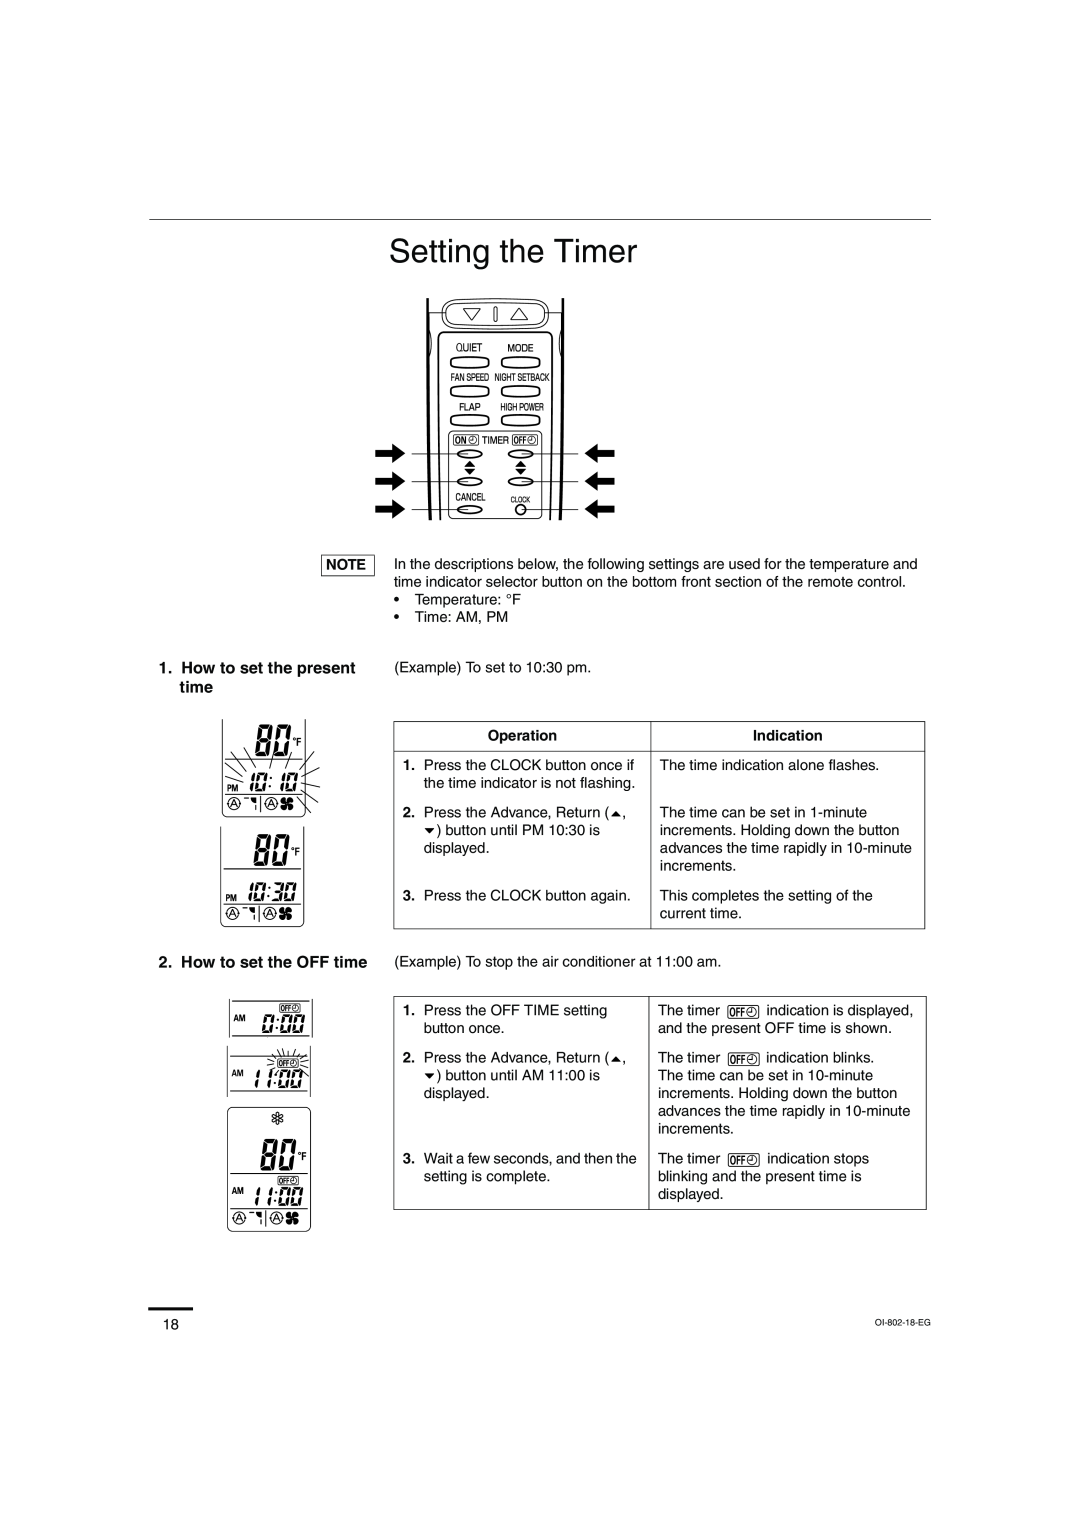 Sanyo KHS1271, KHS0971 instruction manual Setting the Timer, How to set the present time 